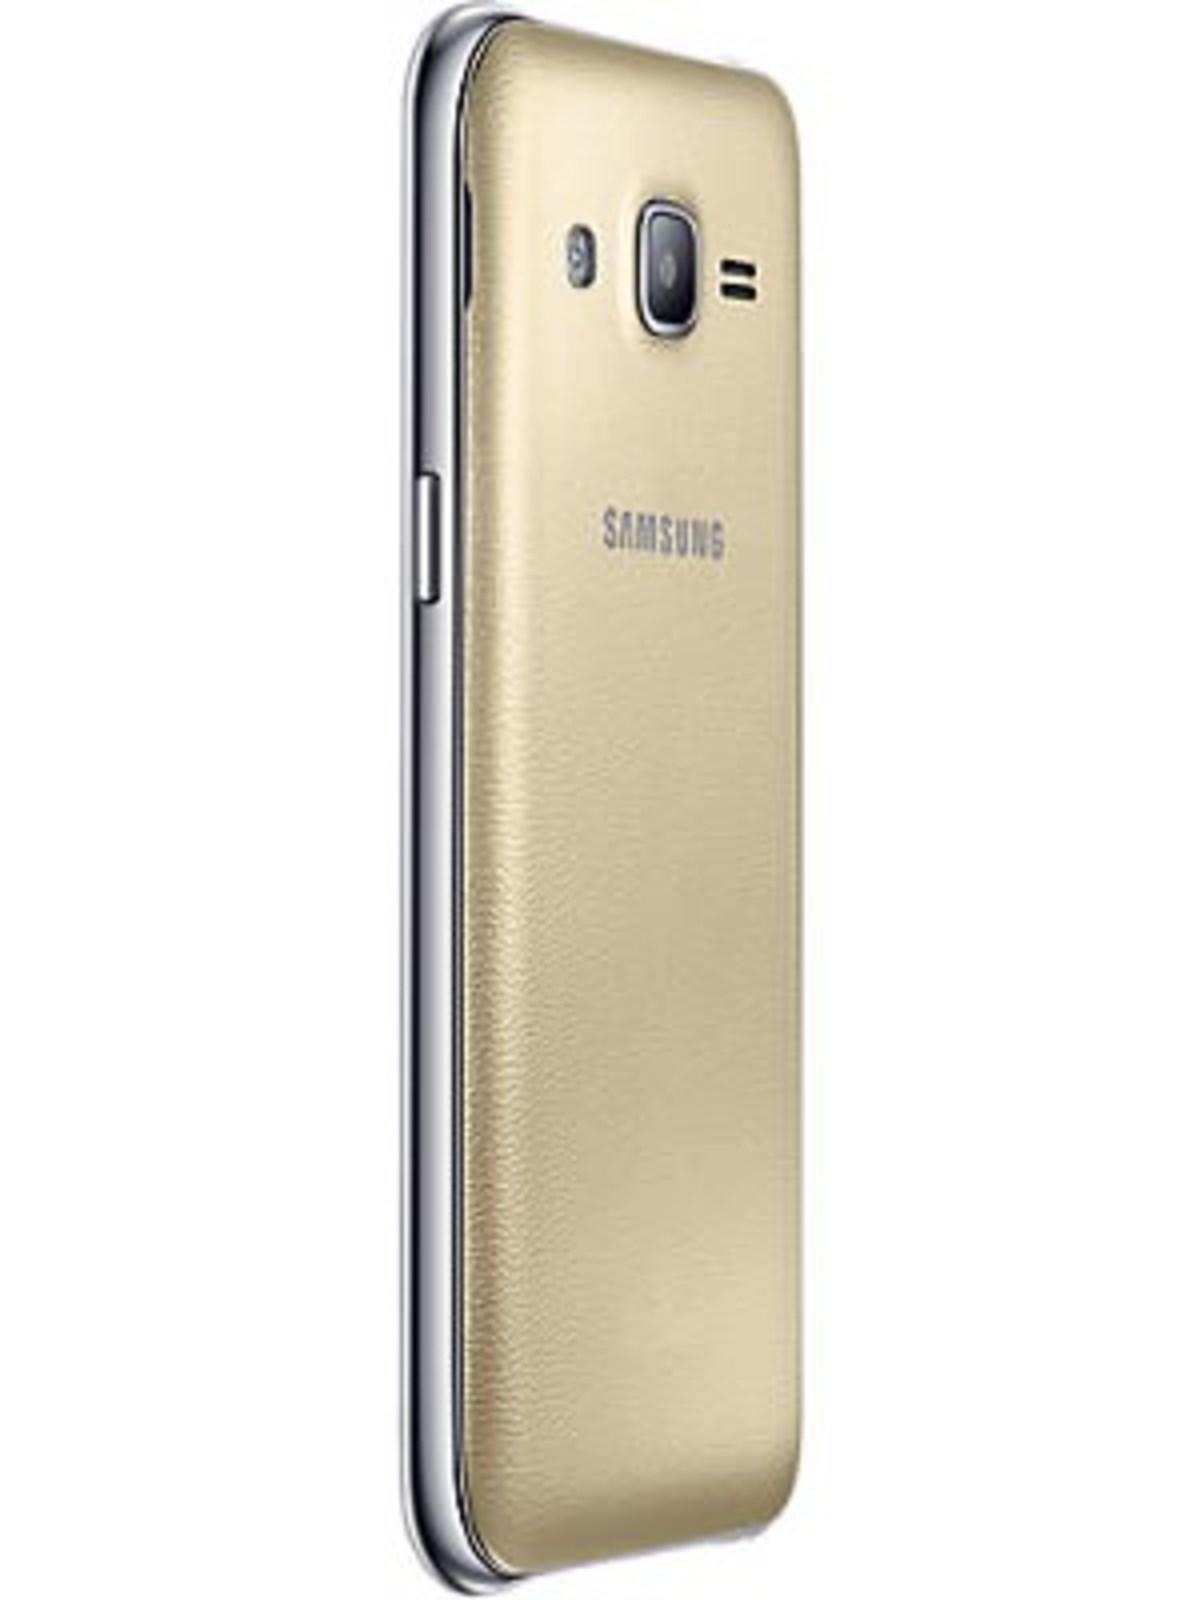 Samsung Galaxy J2 15 Price In India Full Specifications 6th Jul 22 At Gadgets Now